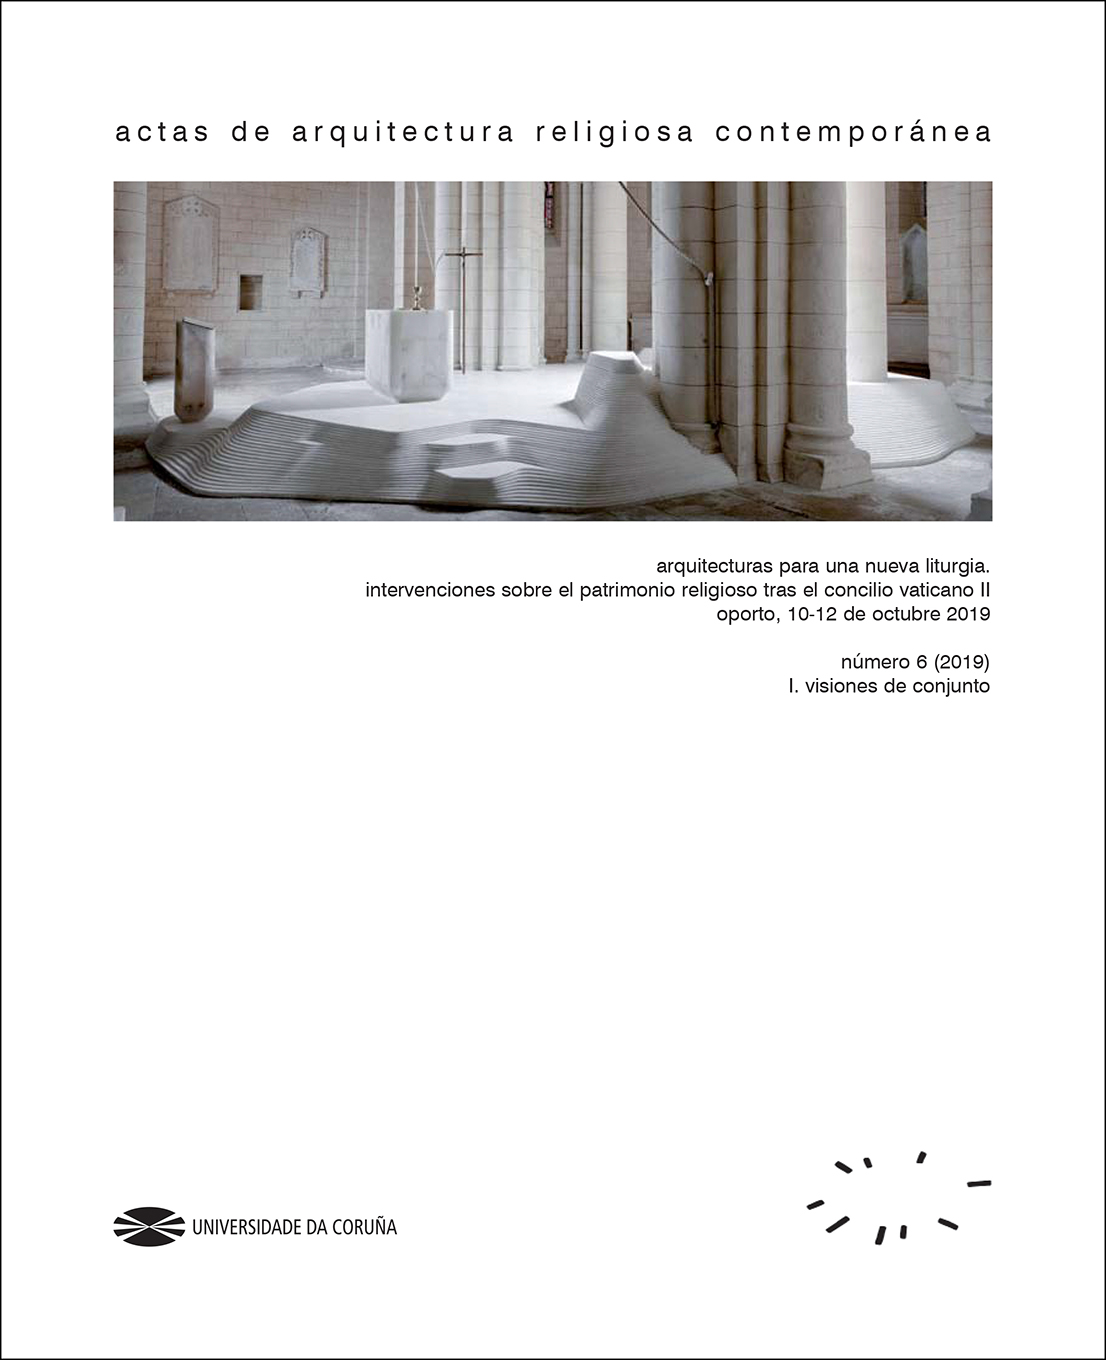 					View Vol. 6 (2019): Architectures for a new liturgy. Actions on the religious heritage after Vatican II - Overall visions
				